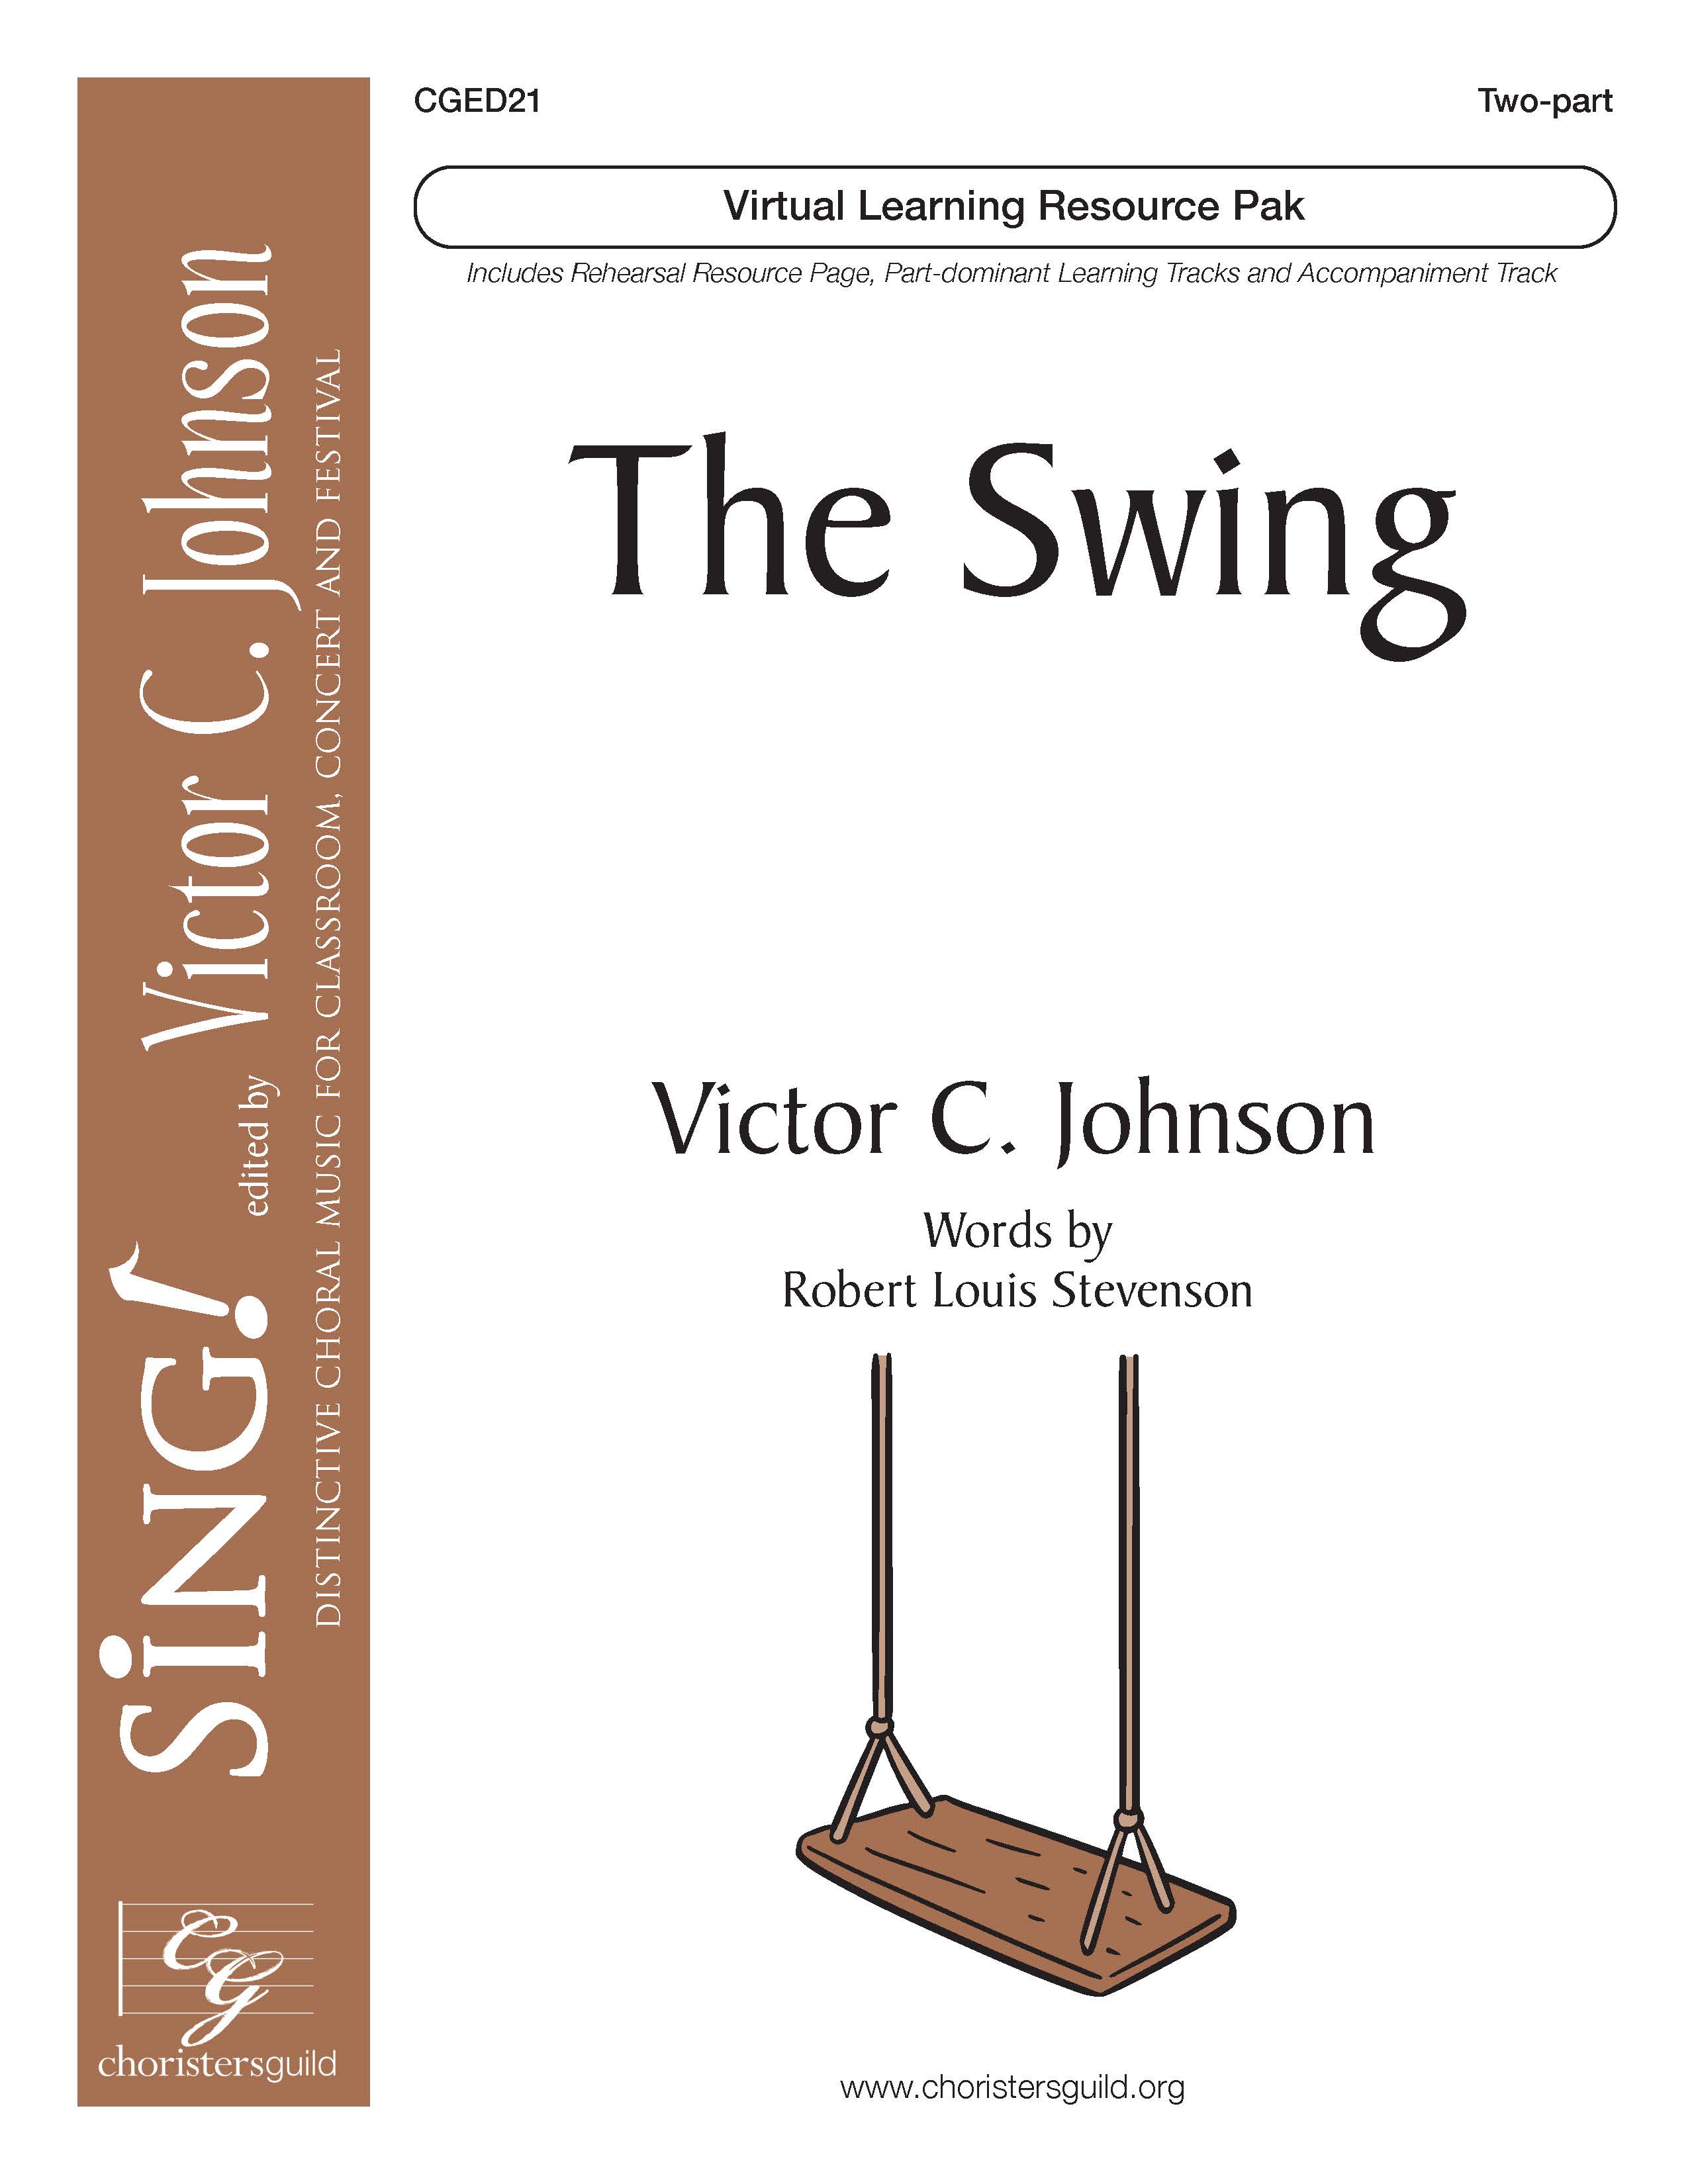 The Swing (Virtual Learning Resource Pak) - Two-part